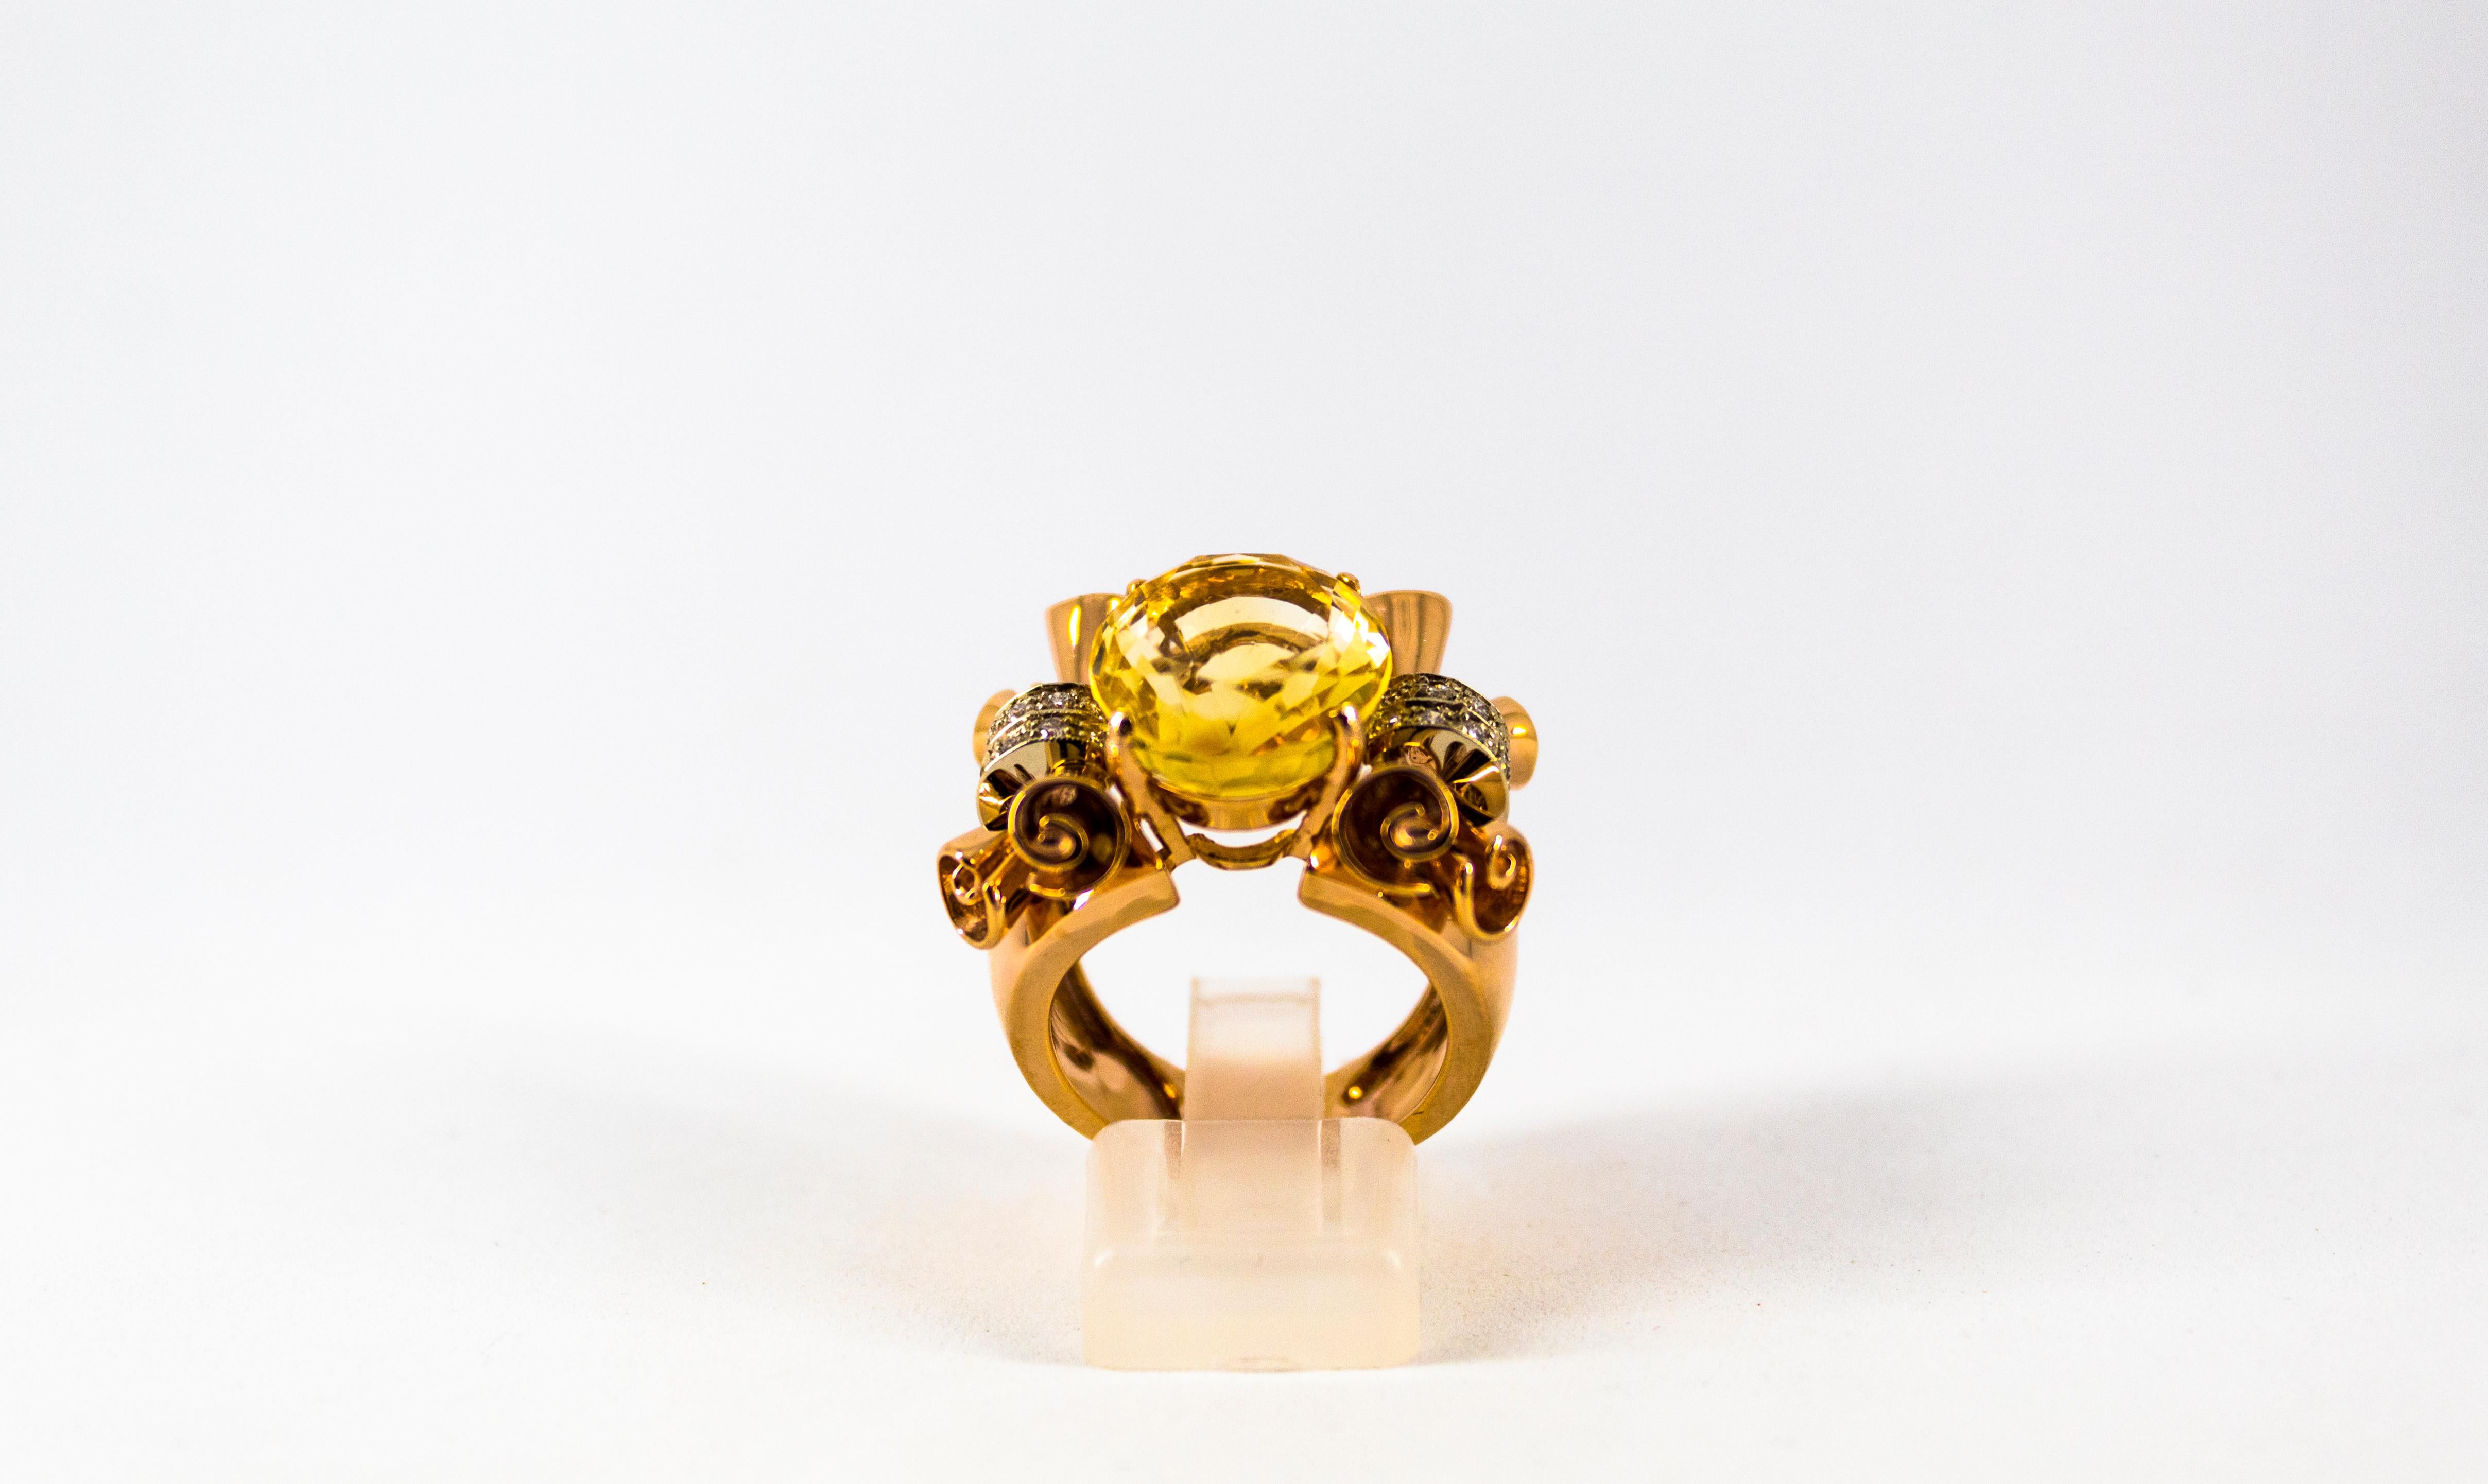 This Ring is made of 14K Yellow Gold.
This Ring has 0.30 Carats of White Diamonds.
This Ring has also a 12.00 Carats Citrine.
This Ring is inspired by Renaissance Style.
Size ITA: 14 USA: 6 and 3/4
We're a workshop so every piece is handmade,